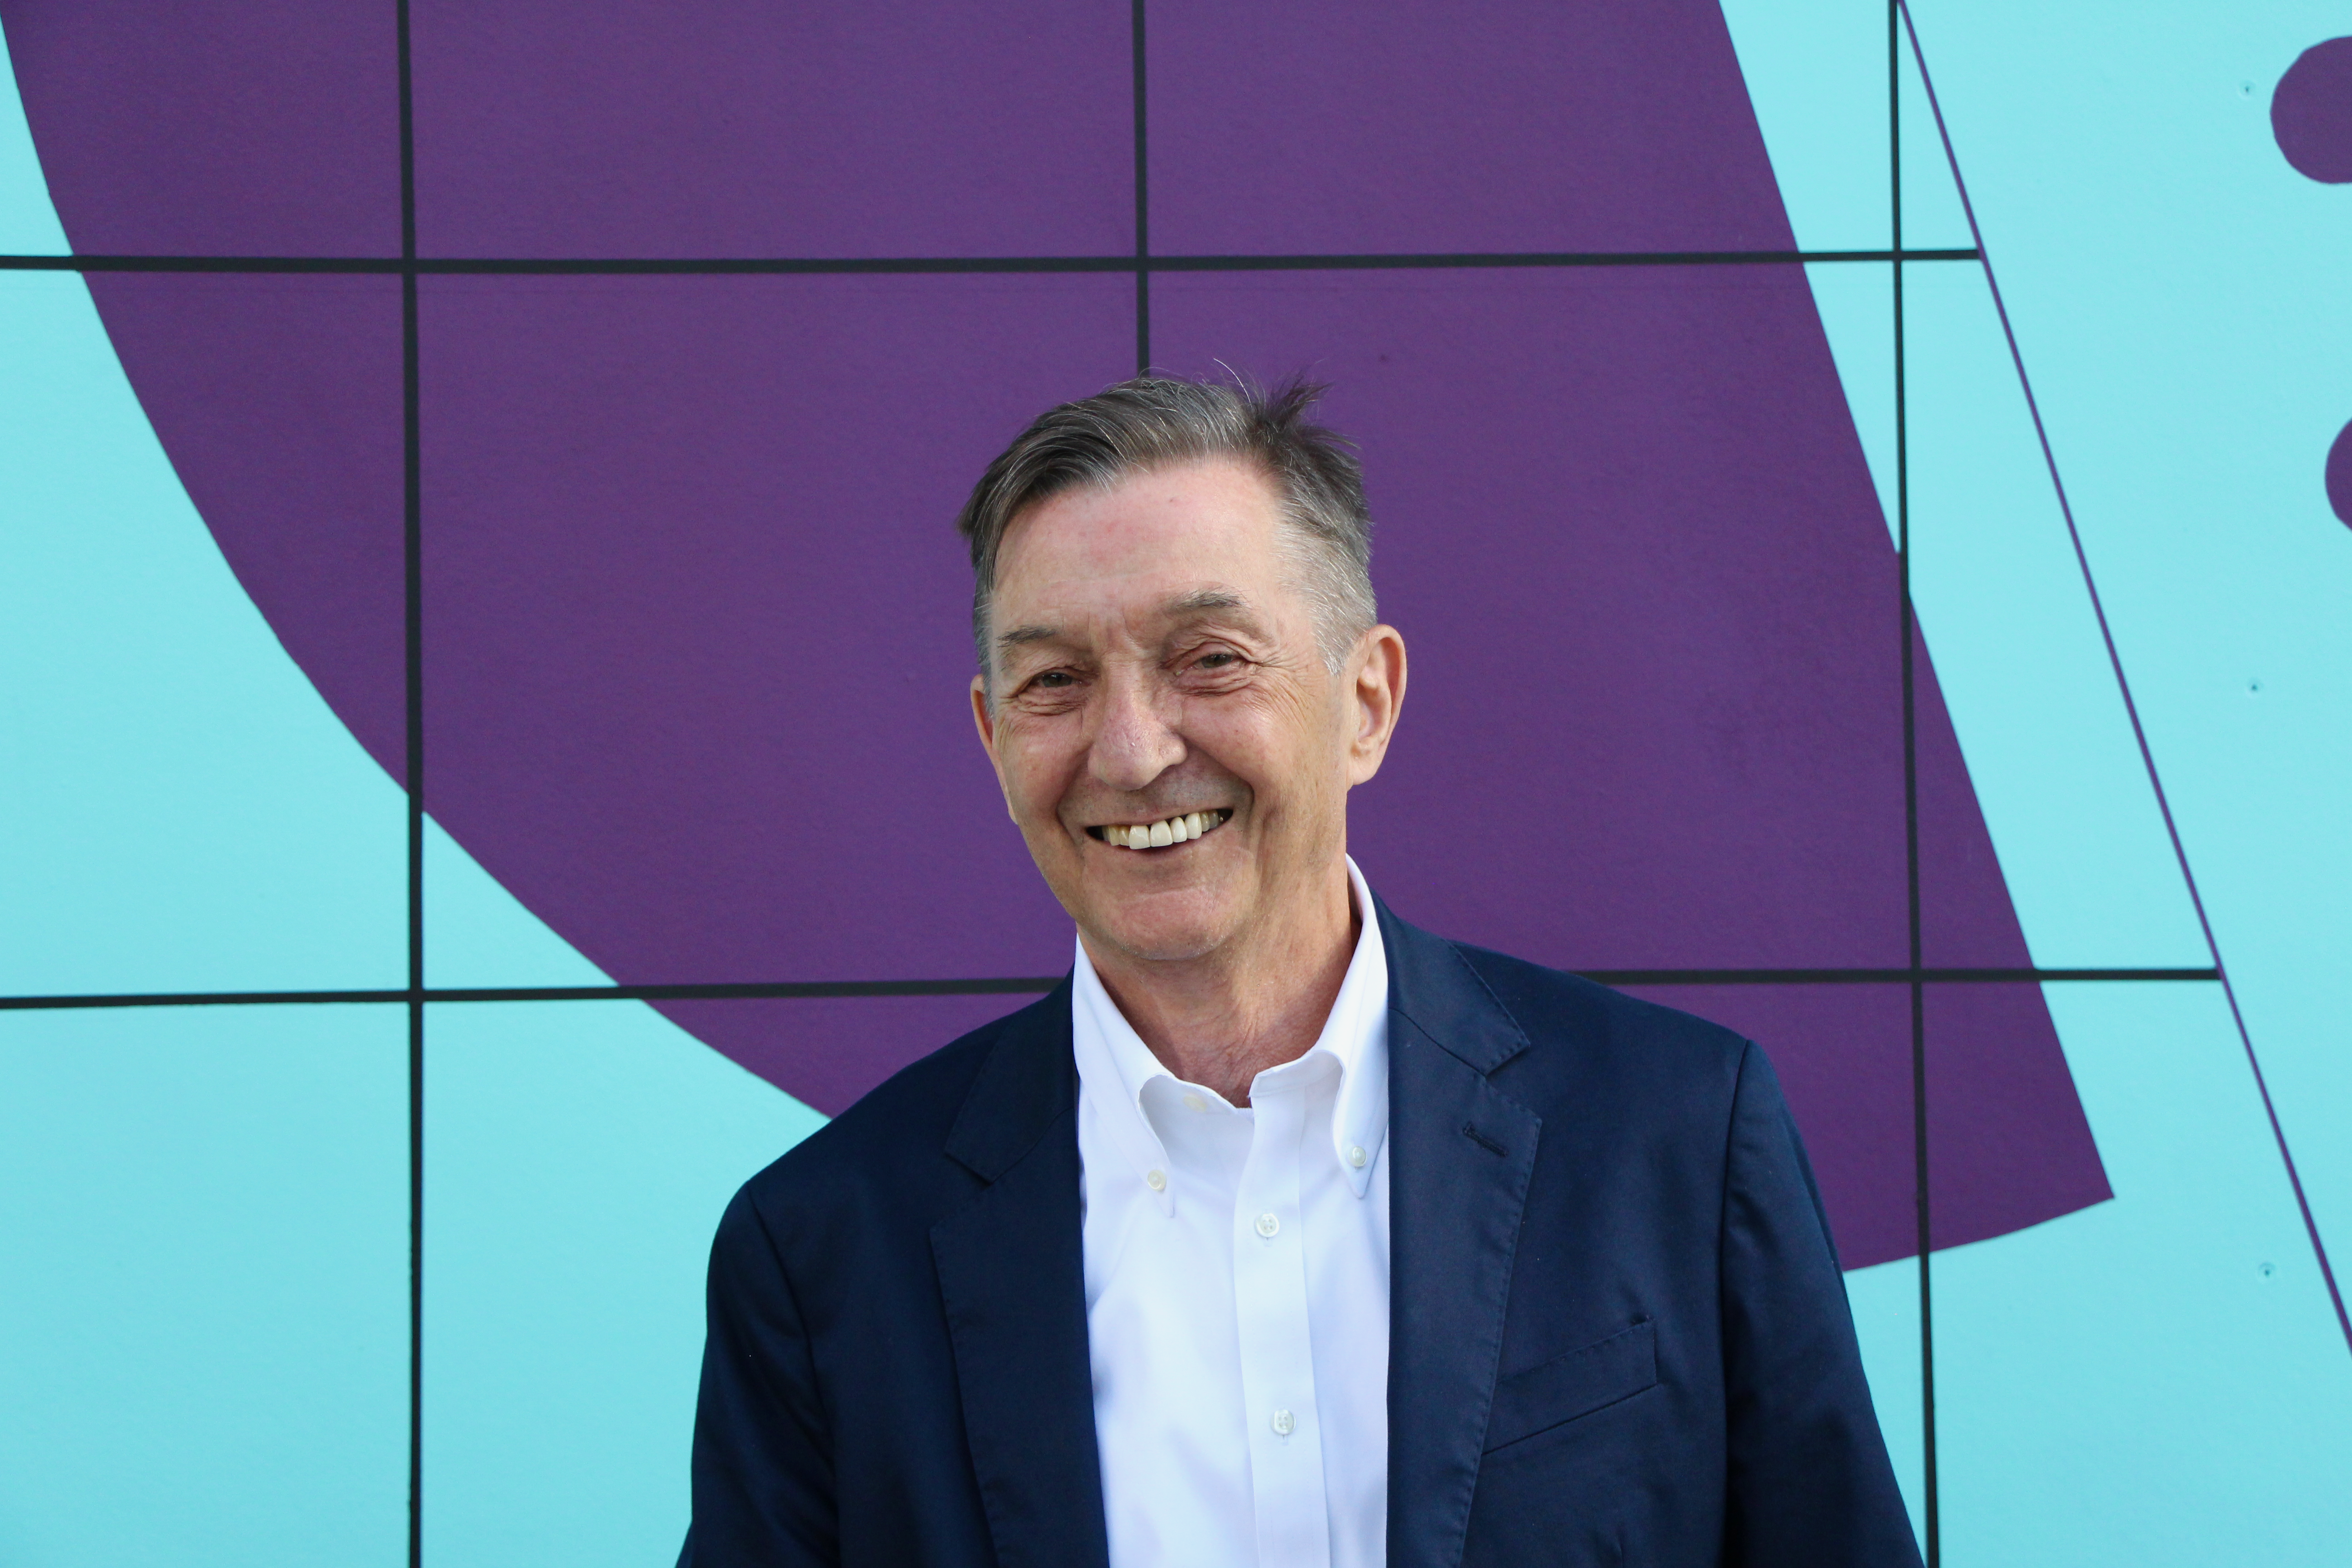 David LePage smiles at the camera in front of a painted purple and turquoise wall.